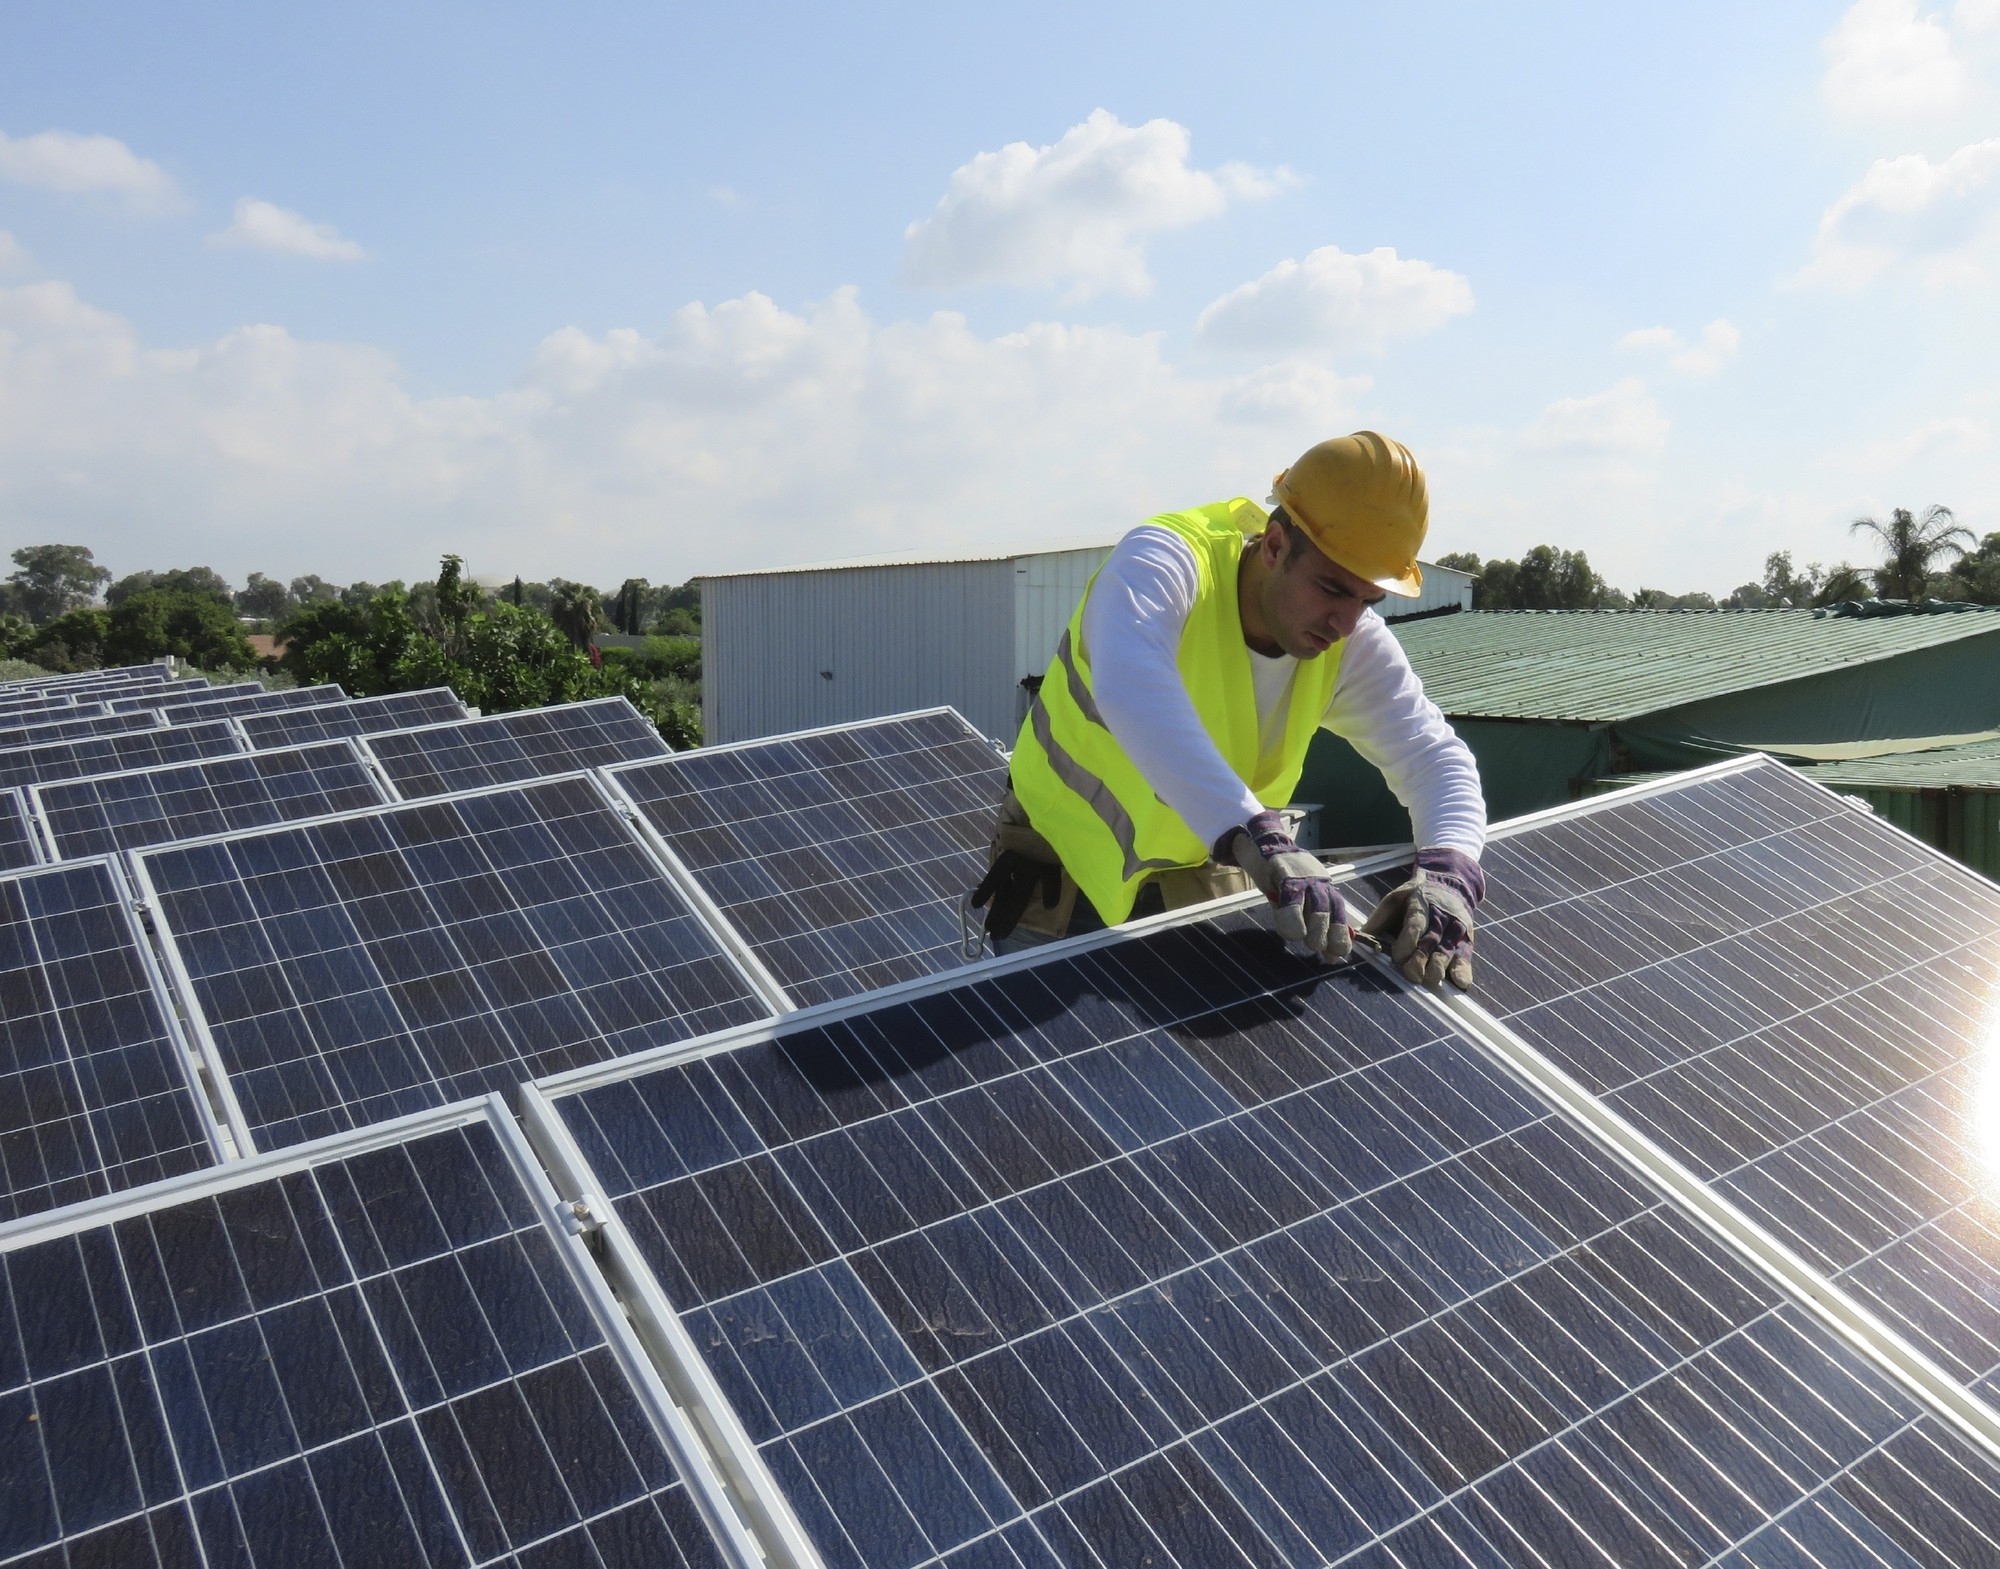 8 Key Questions To Ask a Solar Installer First. - Gearbrain